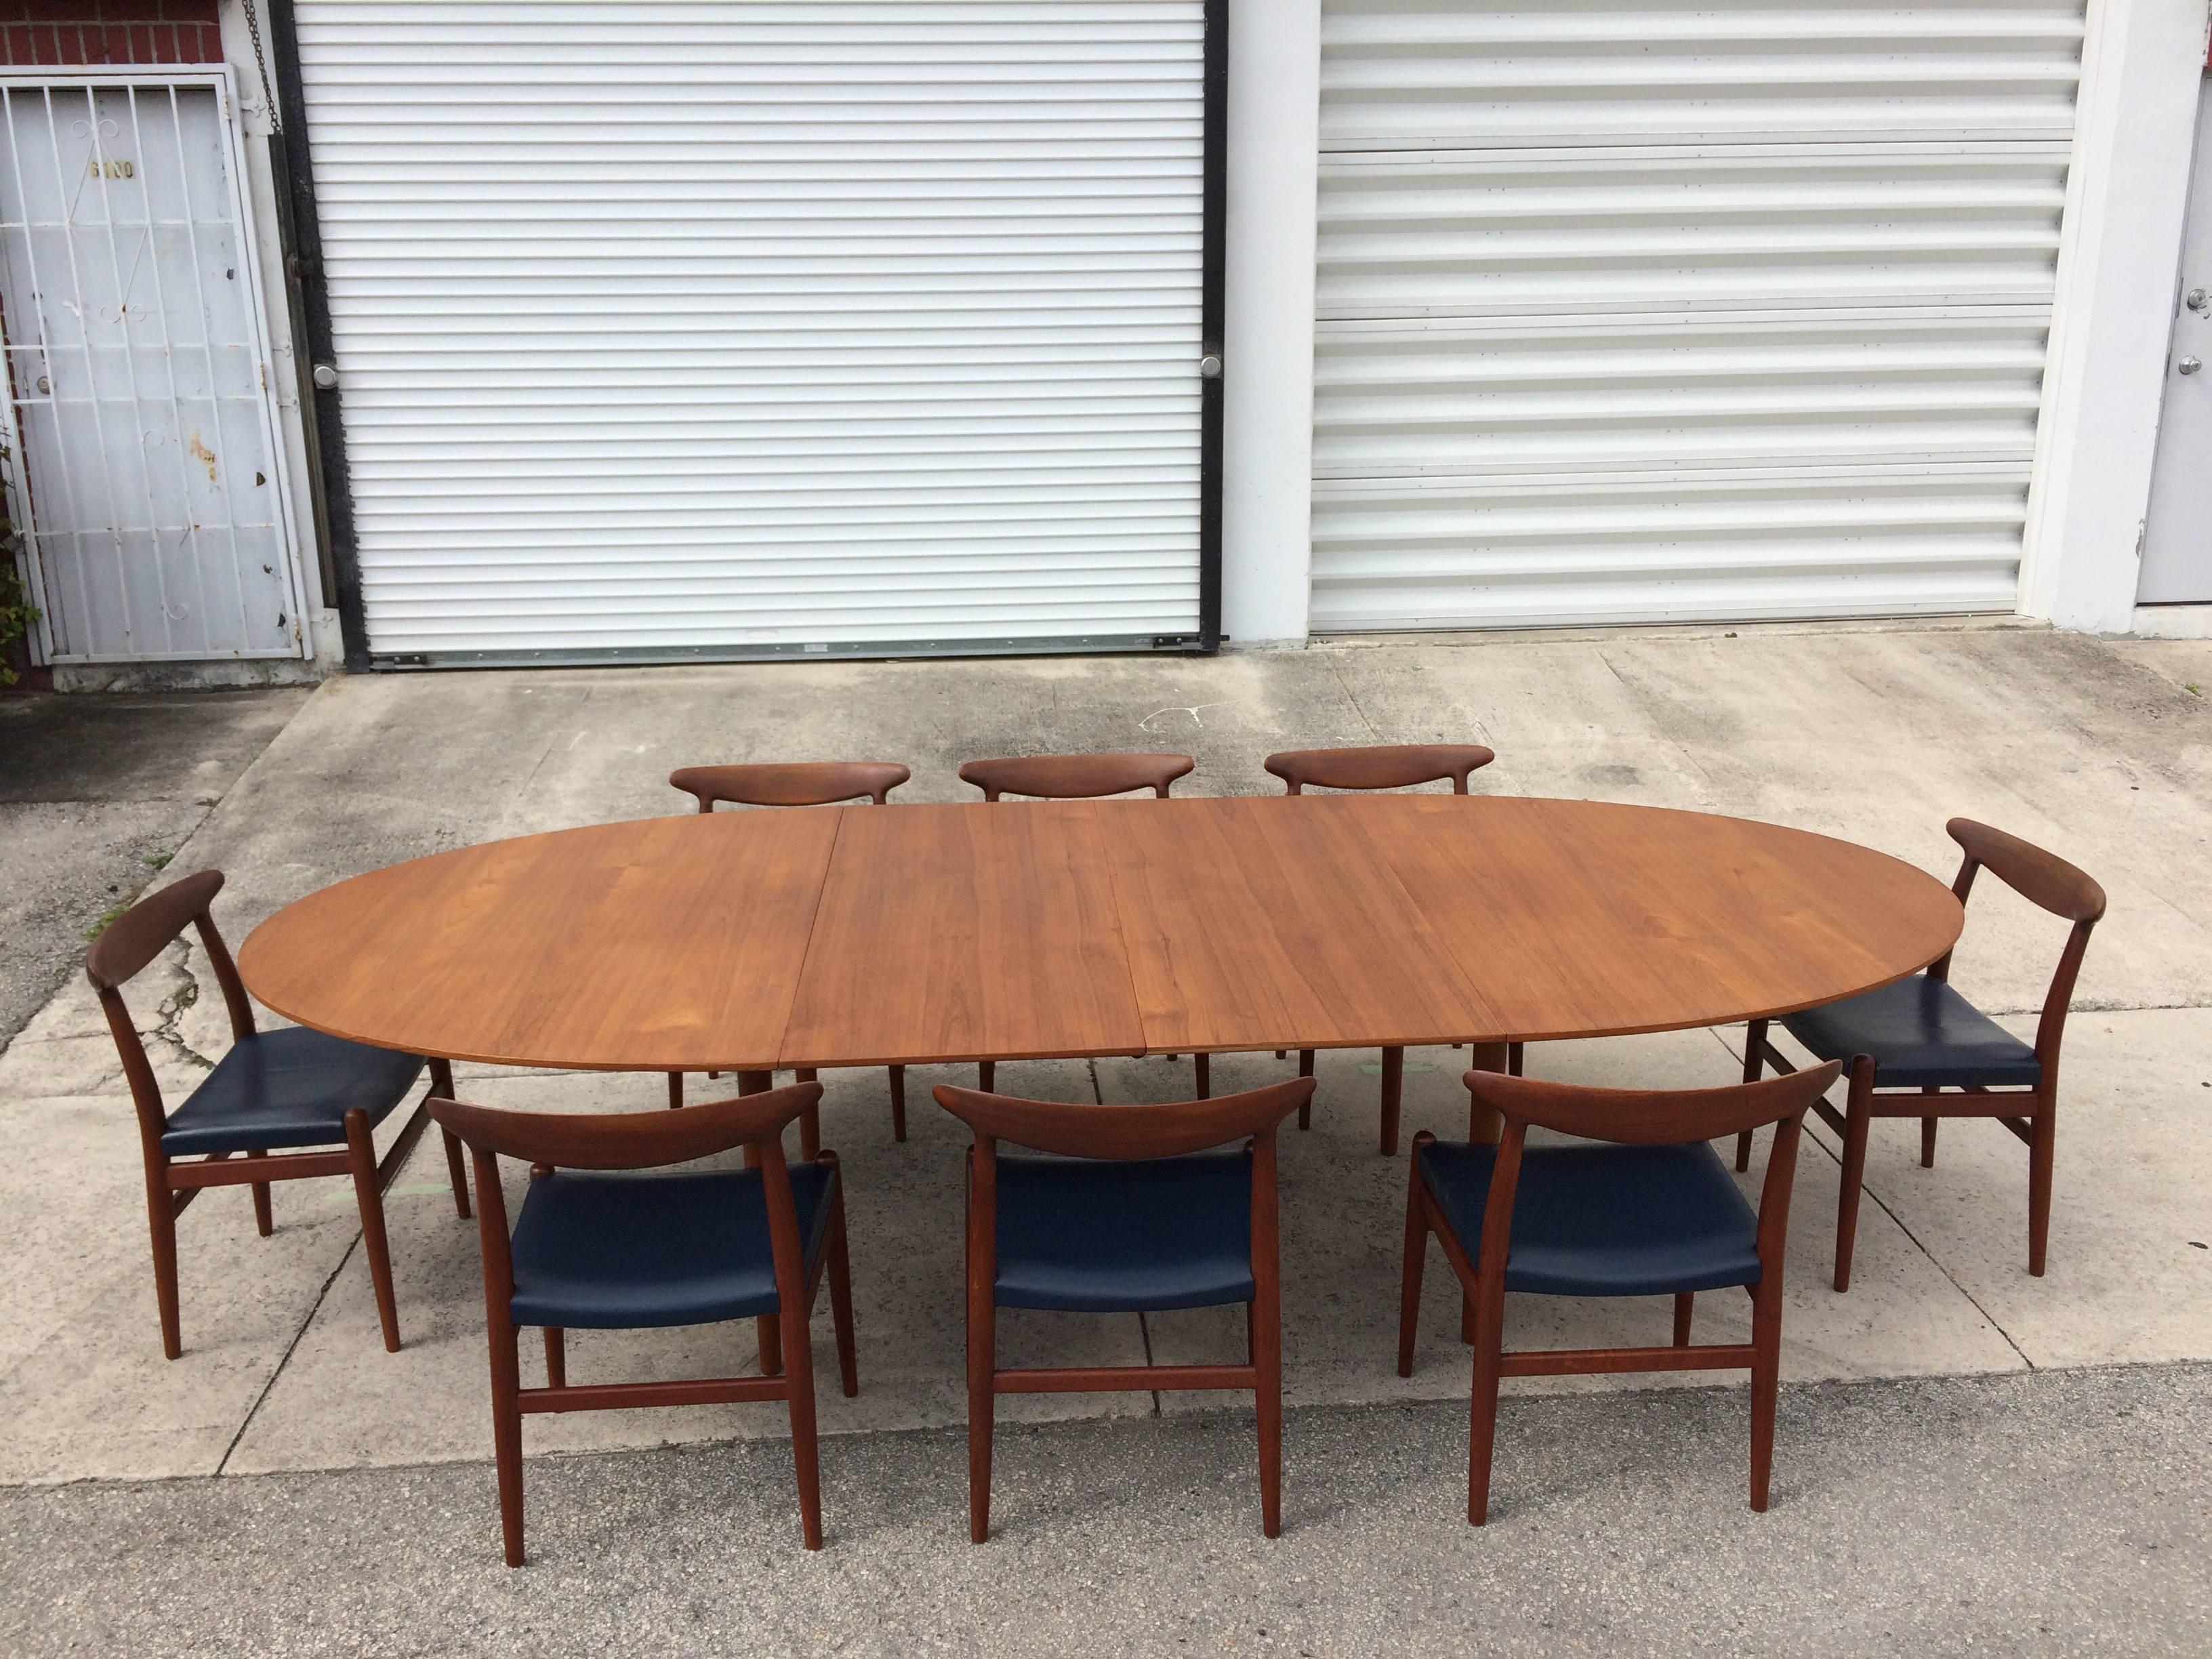 Large Finn Juhl teak dining table.
Table has two 21.75 inch leaves; table measures 122 inches when fully extended, closed without leaves 78.5 W x 55.25 D x 28.5 H inches. The Table is signed, please see pictures.